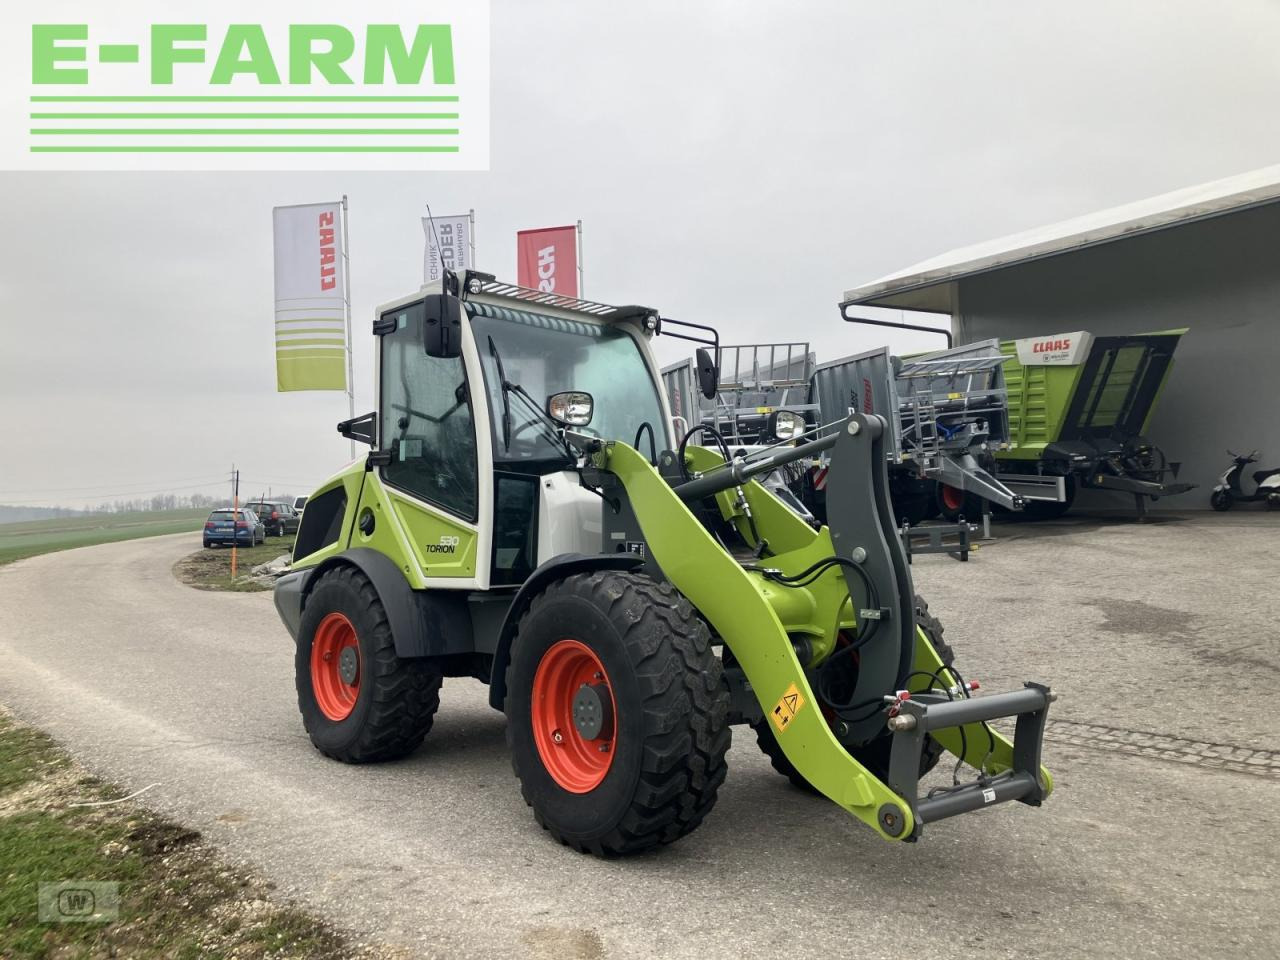 Tractor CLAAS torion 530